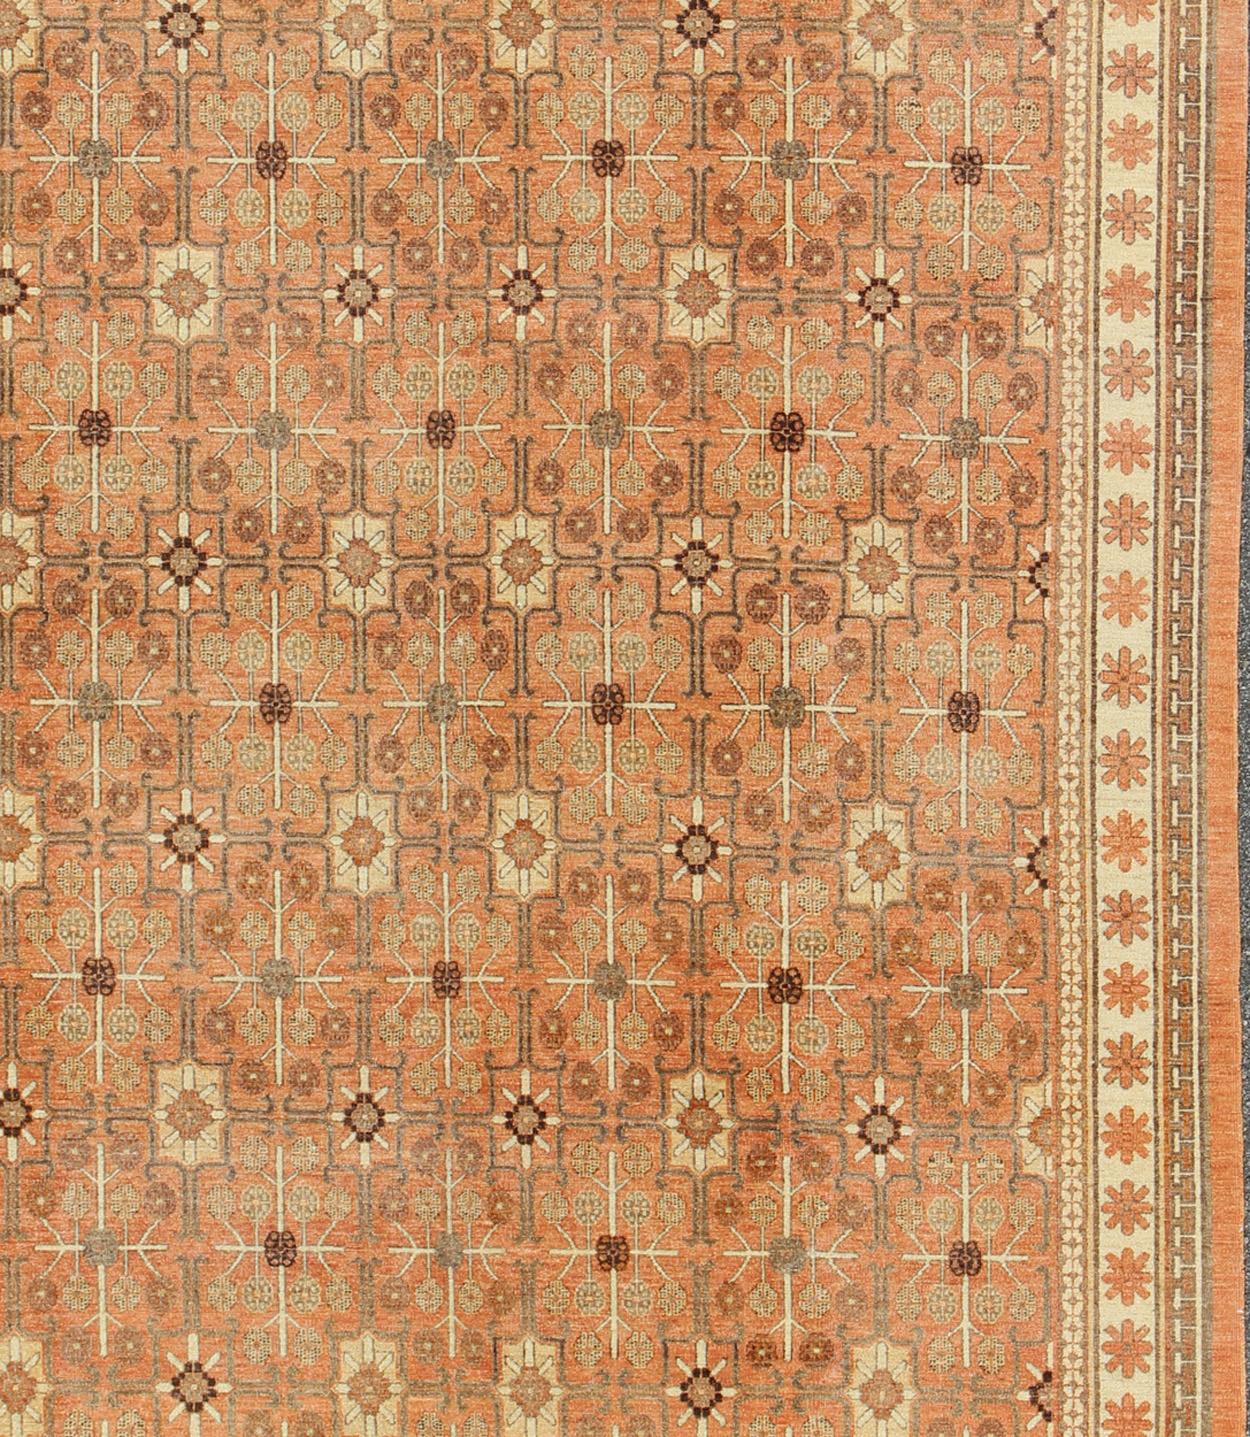 Khotan design Rug with all over geometric and square Design in light tangerine background with accent colors of charcoal, brown, green and taupe. rug KOL-68165, country of origin / type: Afghanistan / Khotan

This Khotan features an all over  Design